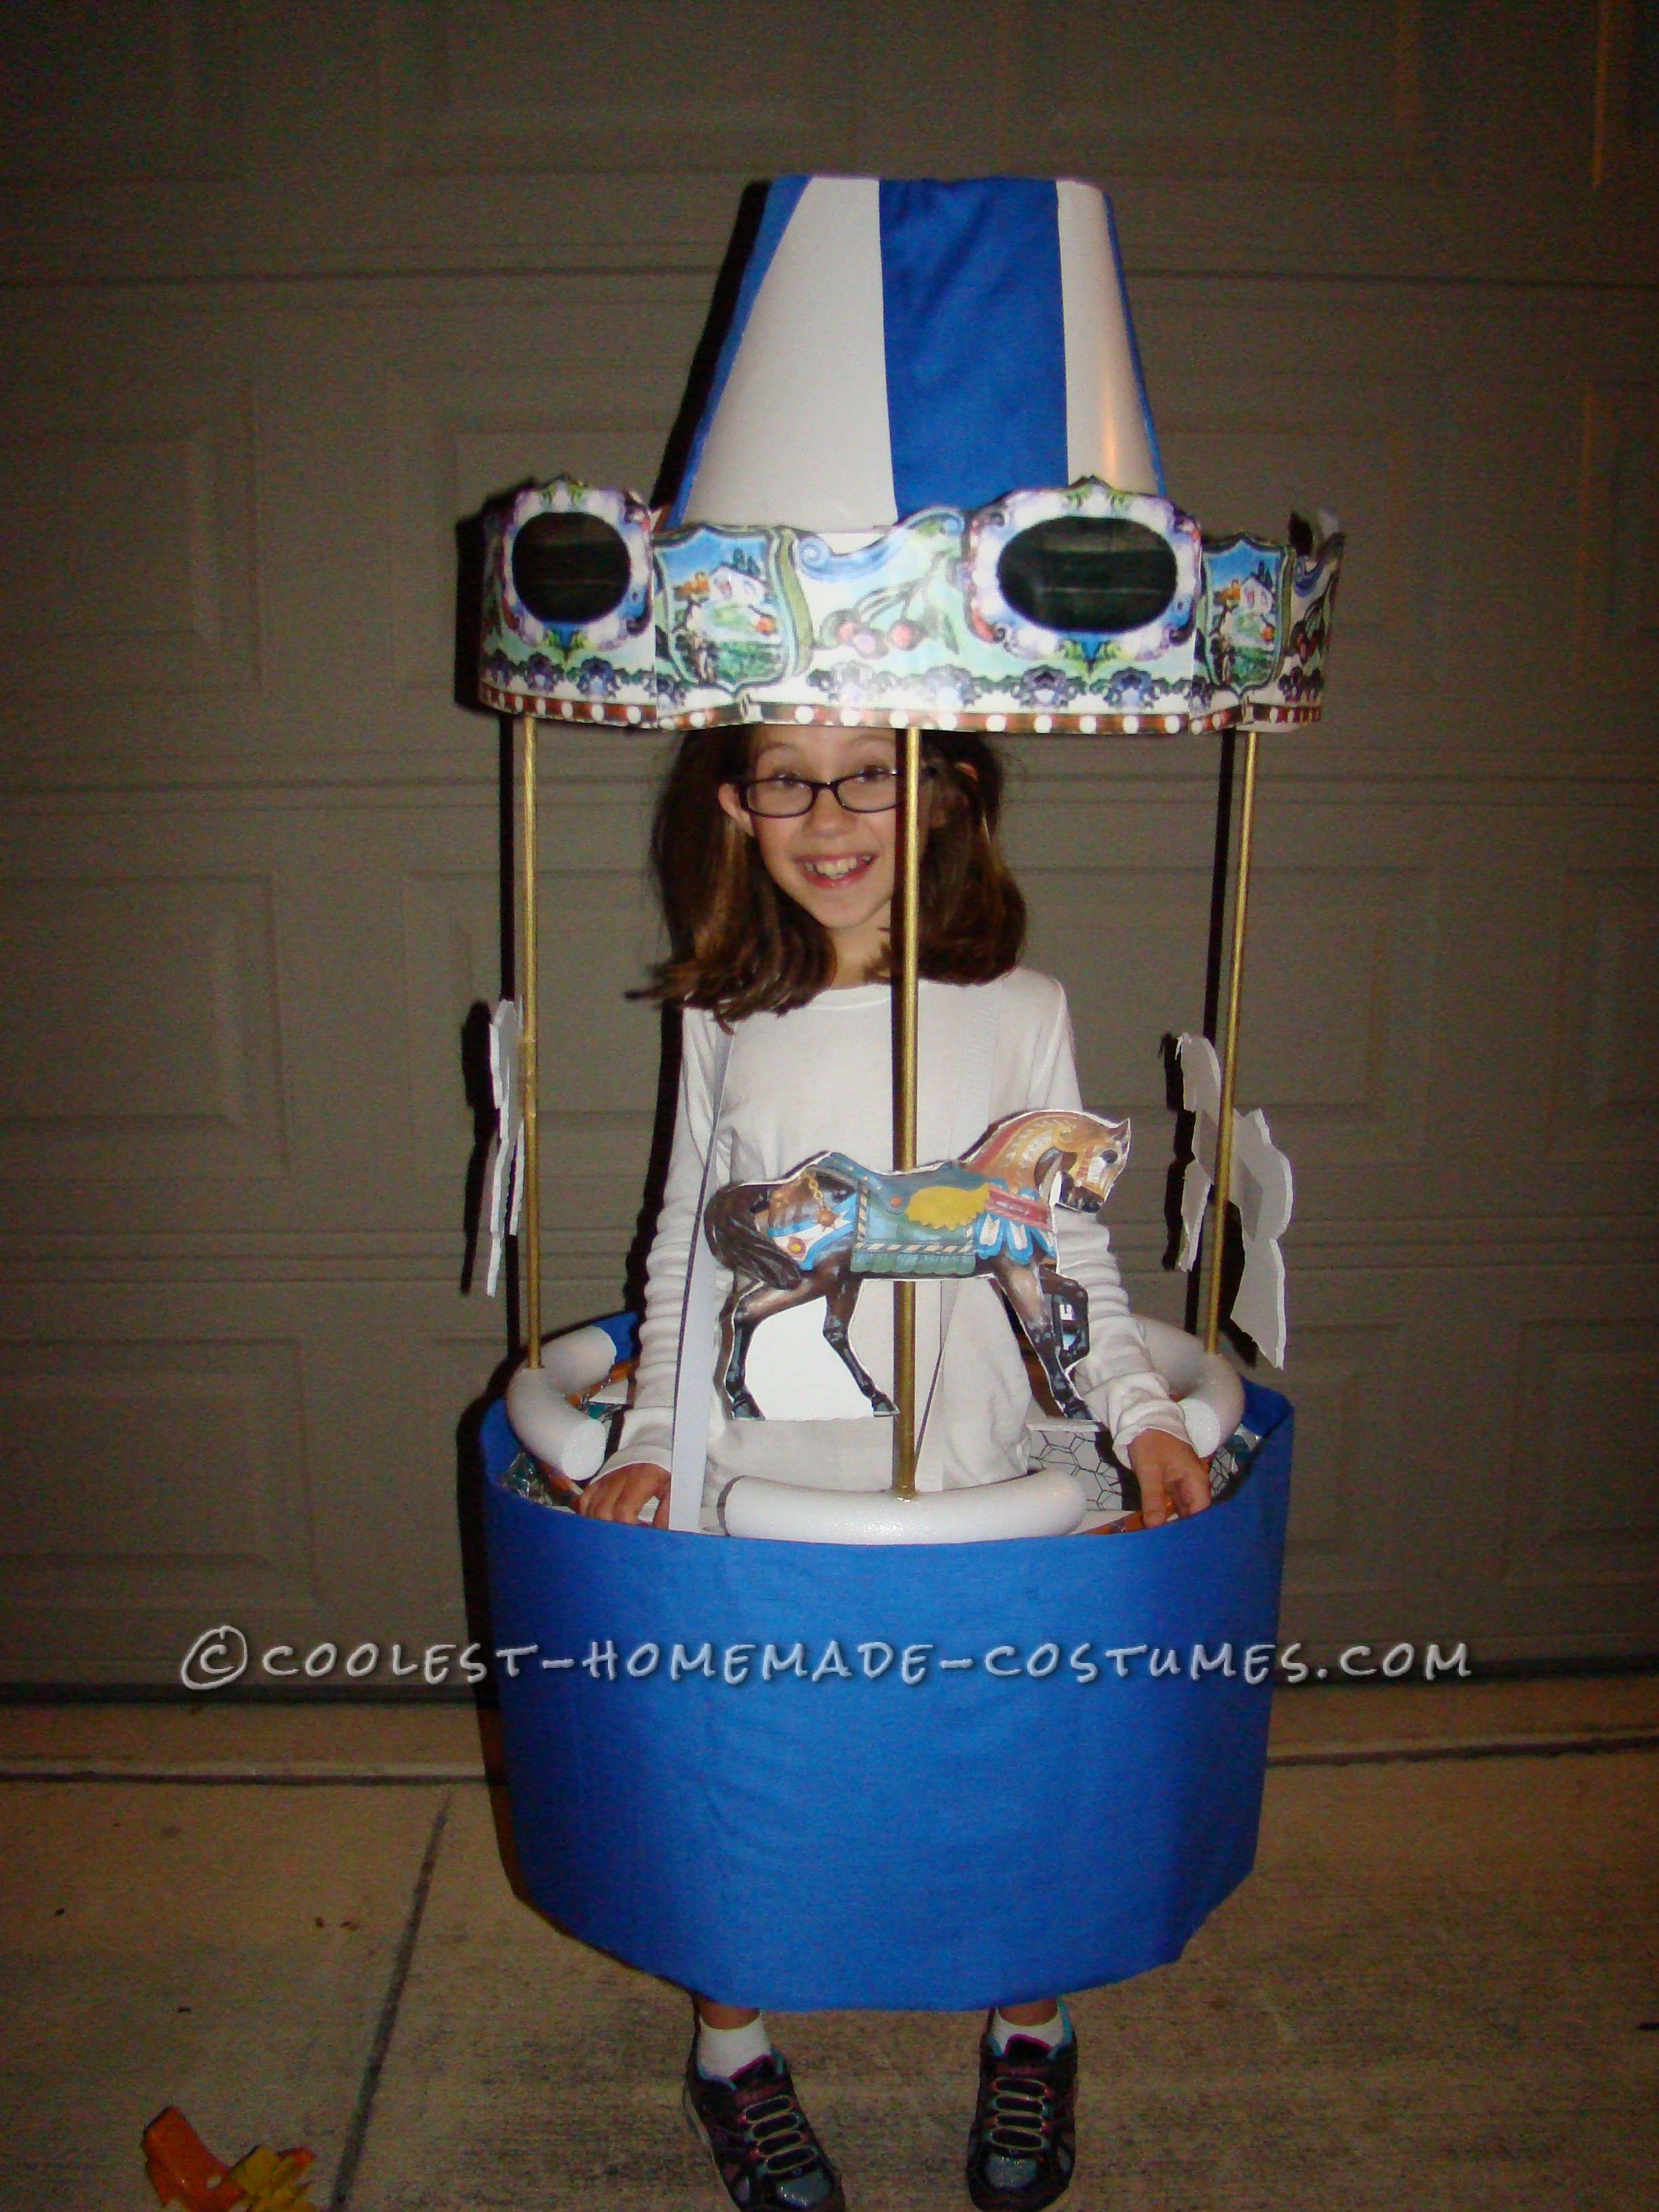 Cool Amusement Park Carousel Costume for a Girl